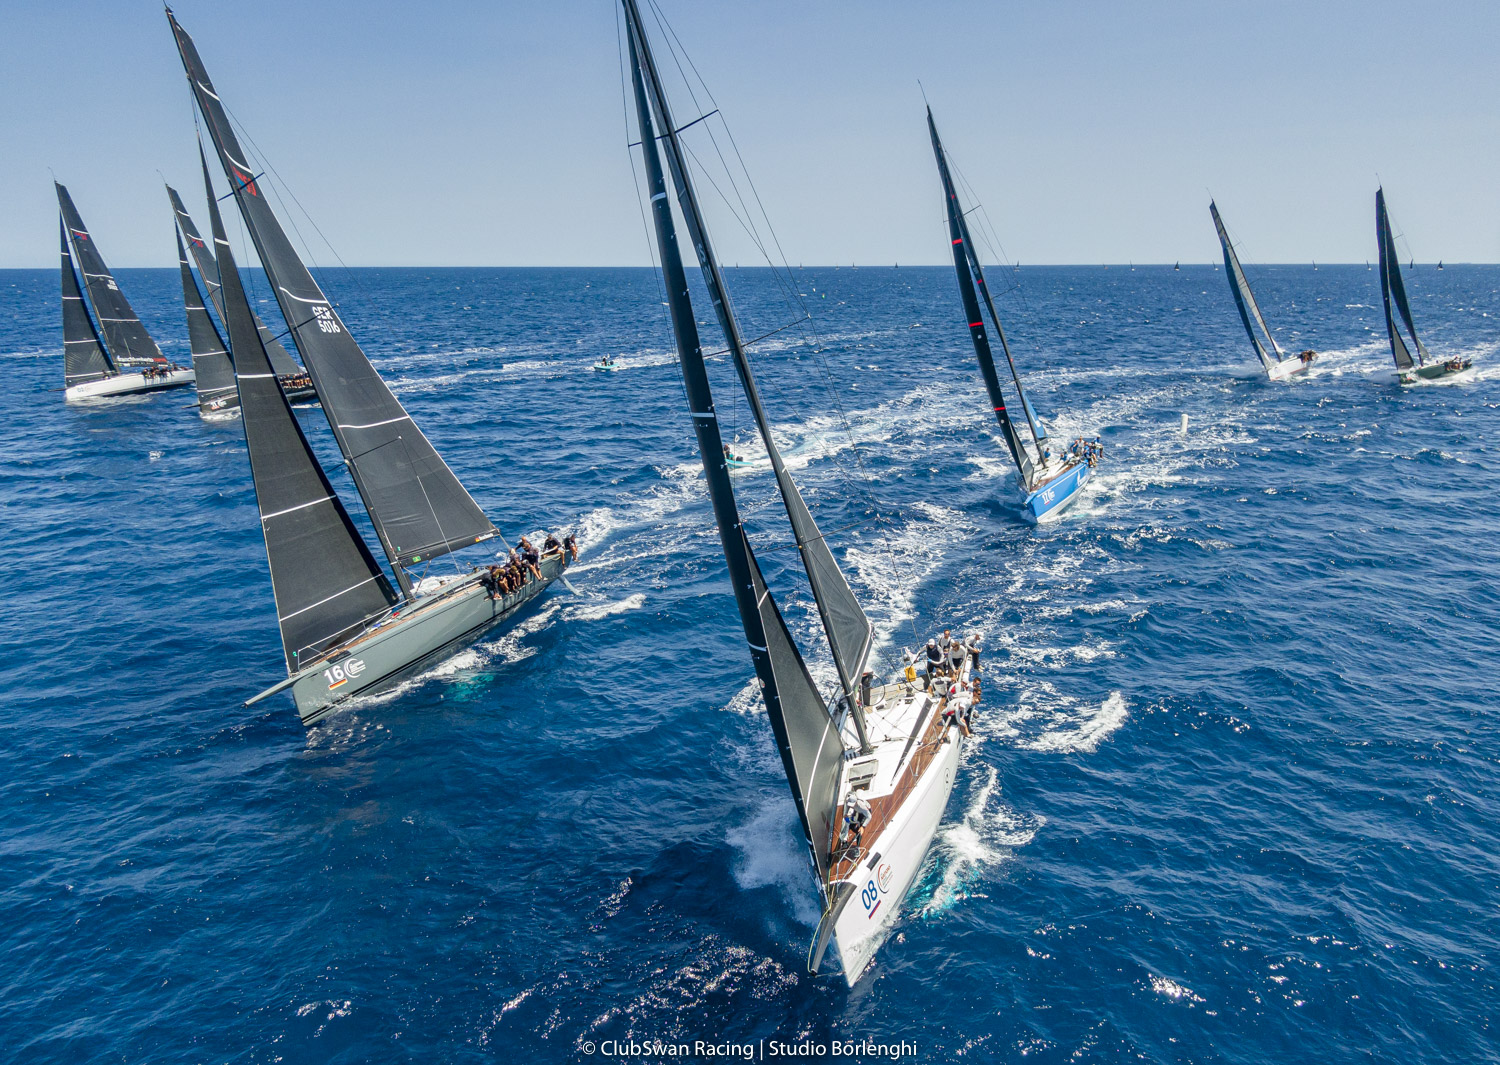  Swan Sardinia Challenge, odds are open going in to the final day - News - Yacht Club Costa Smeralda